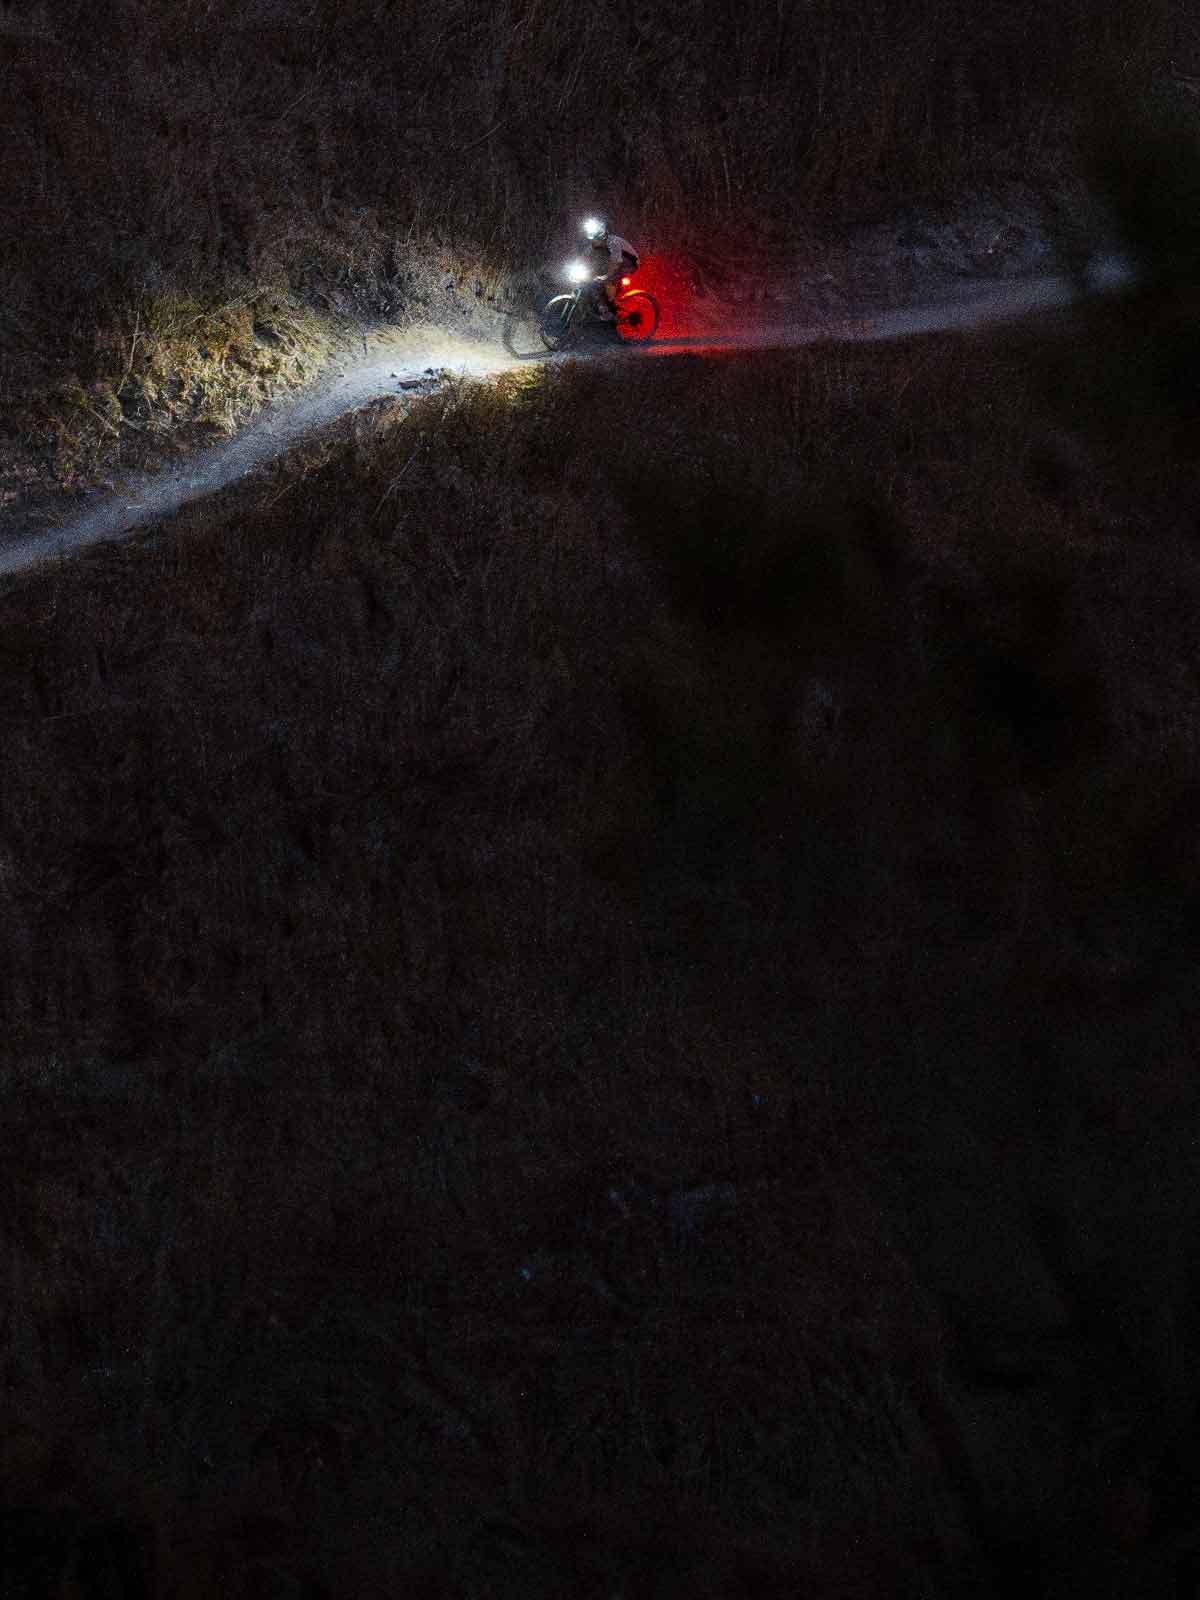 Mountain biker in the dark on the side of a hill with bright lights illuminating the trail ahead